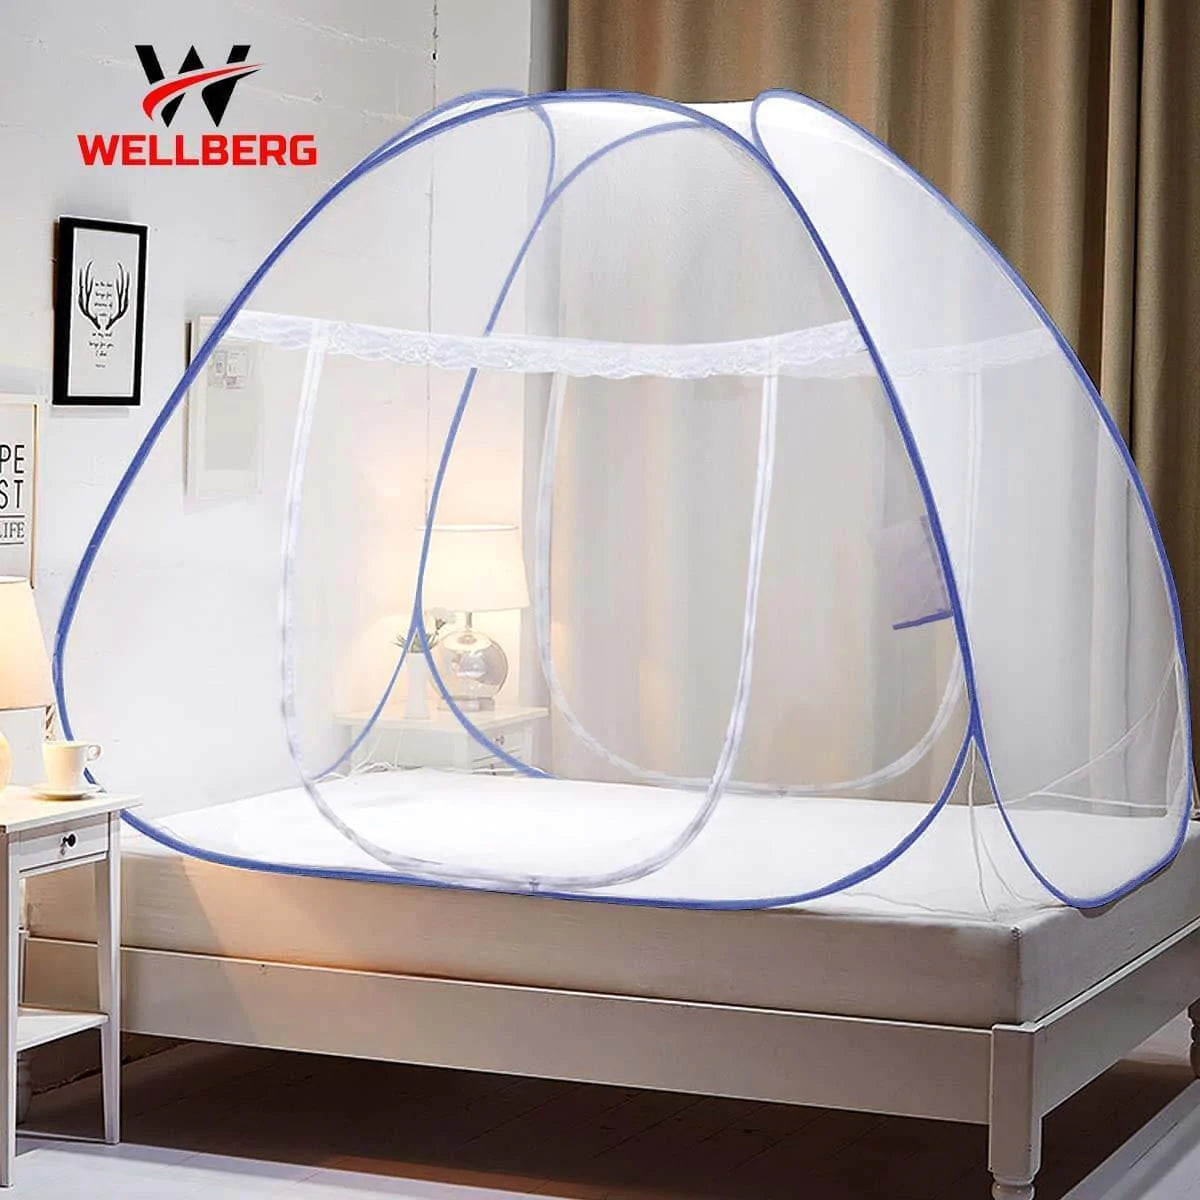 Wellberg Mosquito Net, Double Bed (Queen Size, 24-30 GSM, Foldable, Highly Durable) -Blue - WELLBERG